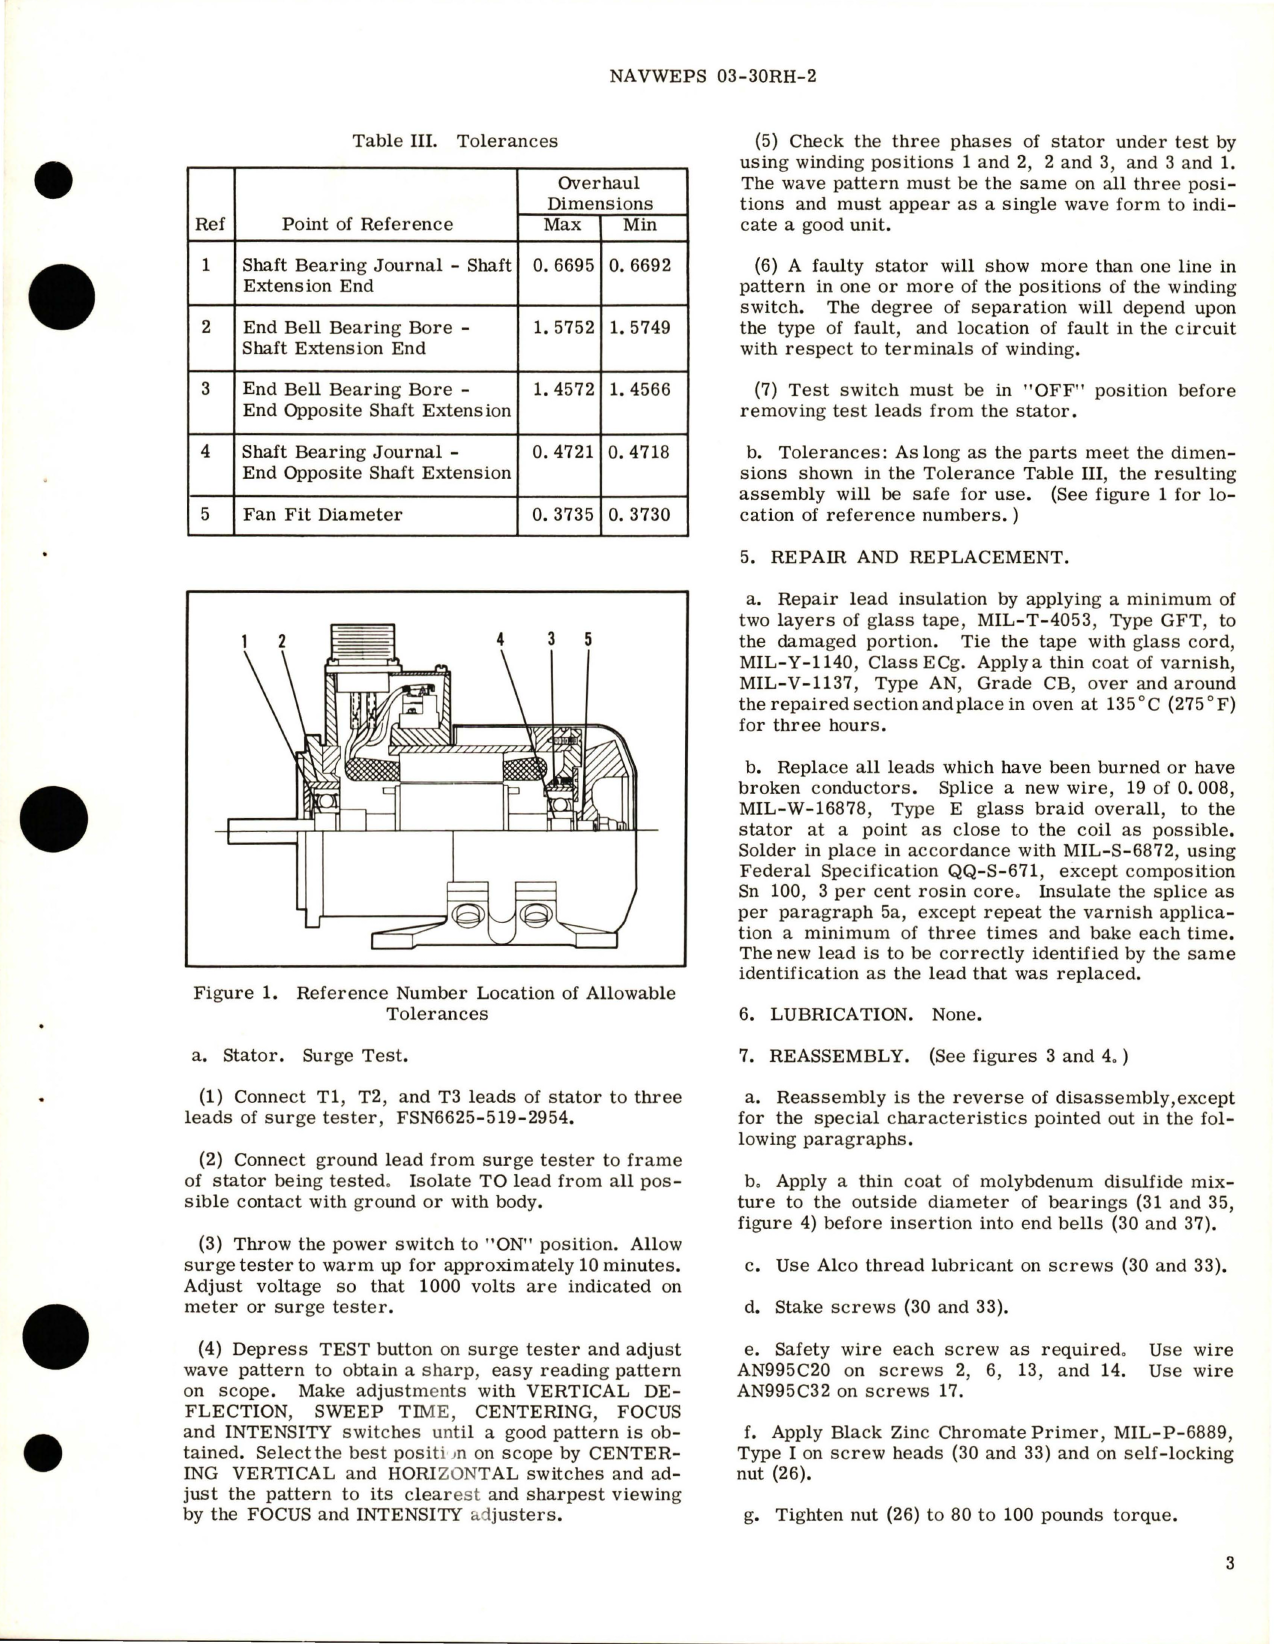 Sample page 5 from AirCorps Library document: Overhaul Instructions with Illustrated Parts Breakdown for Suction Boost Hydraulic Pump - Part 411000-1